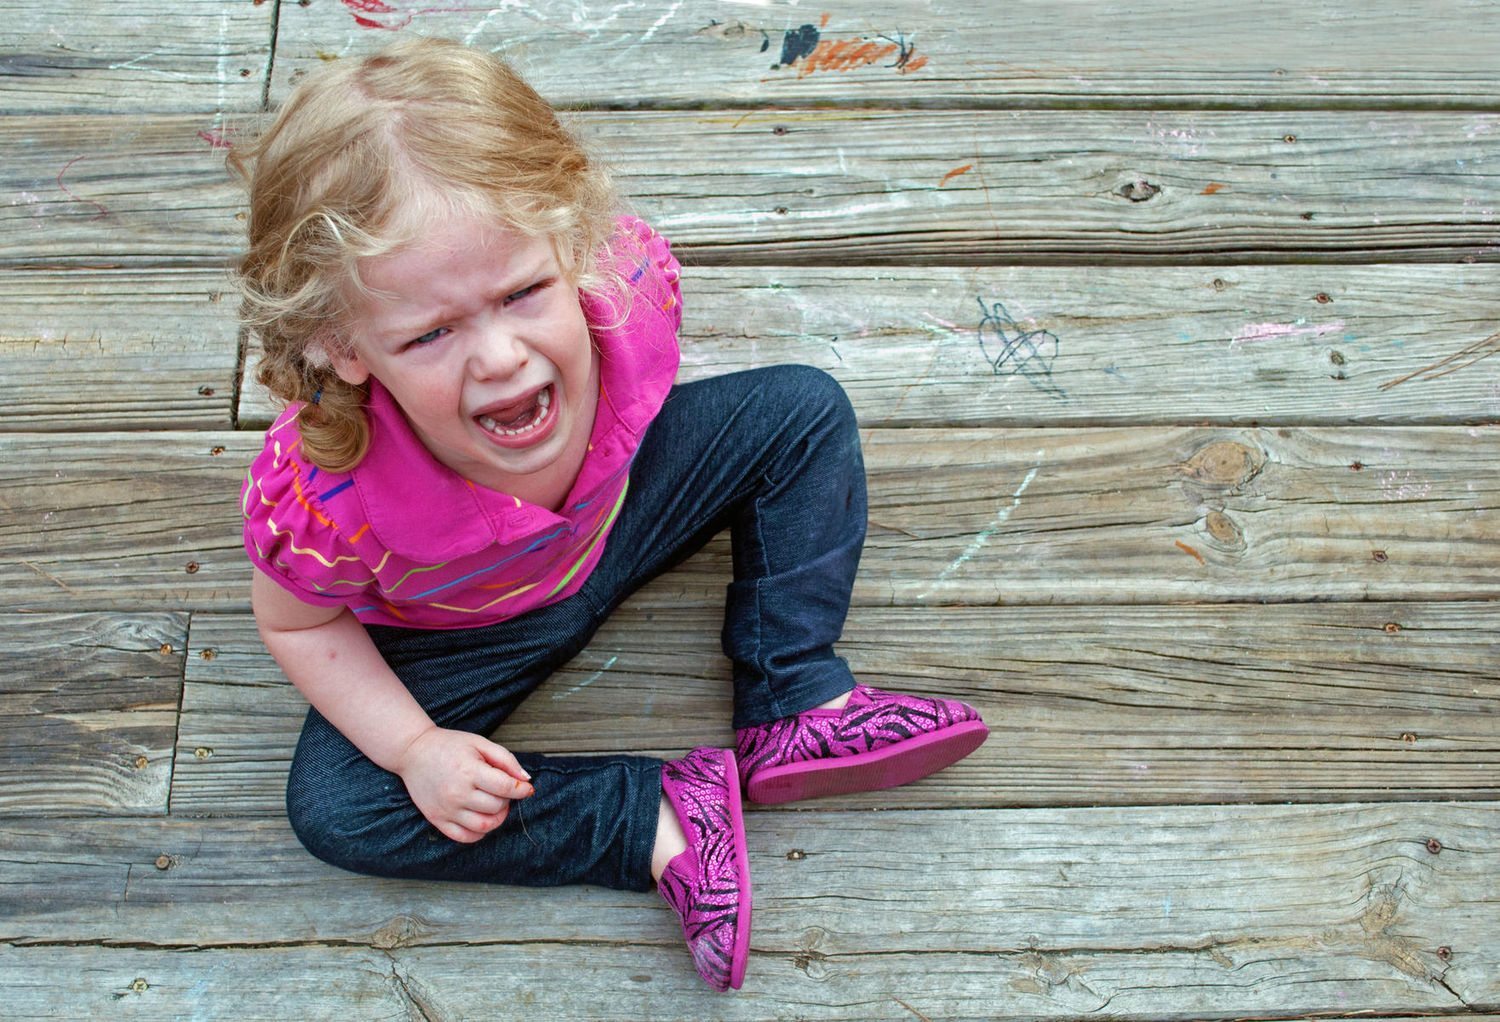 Photos Showing kids' Tantrums That Will You Crack You Up